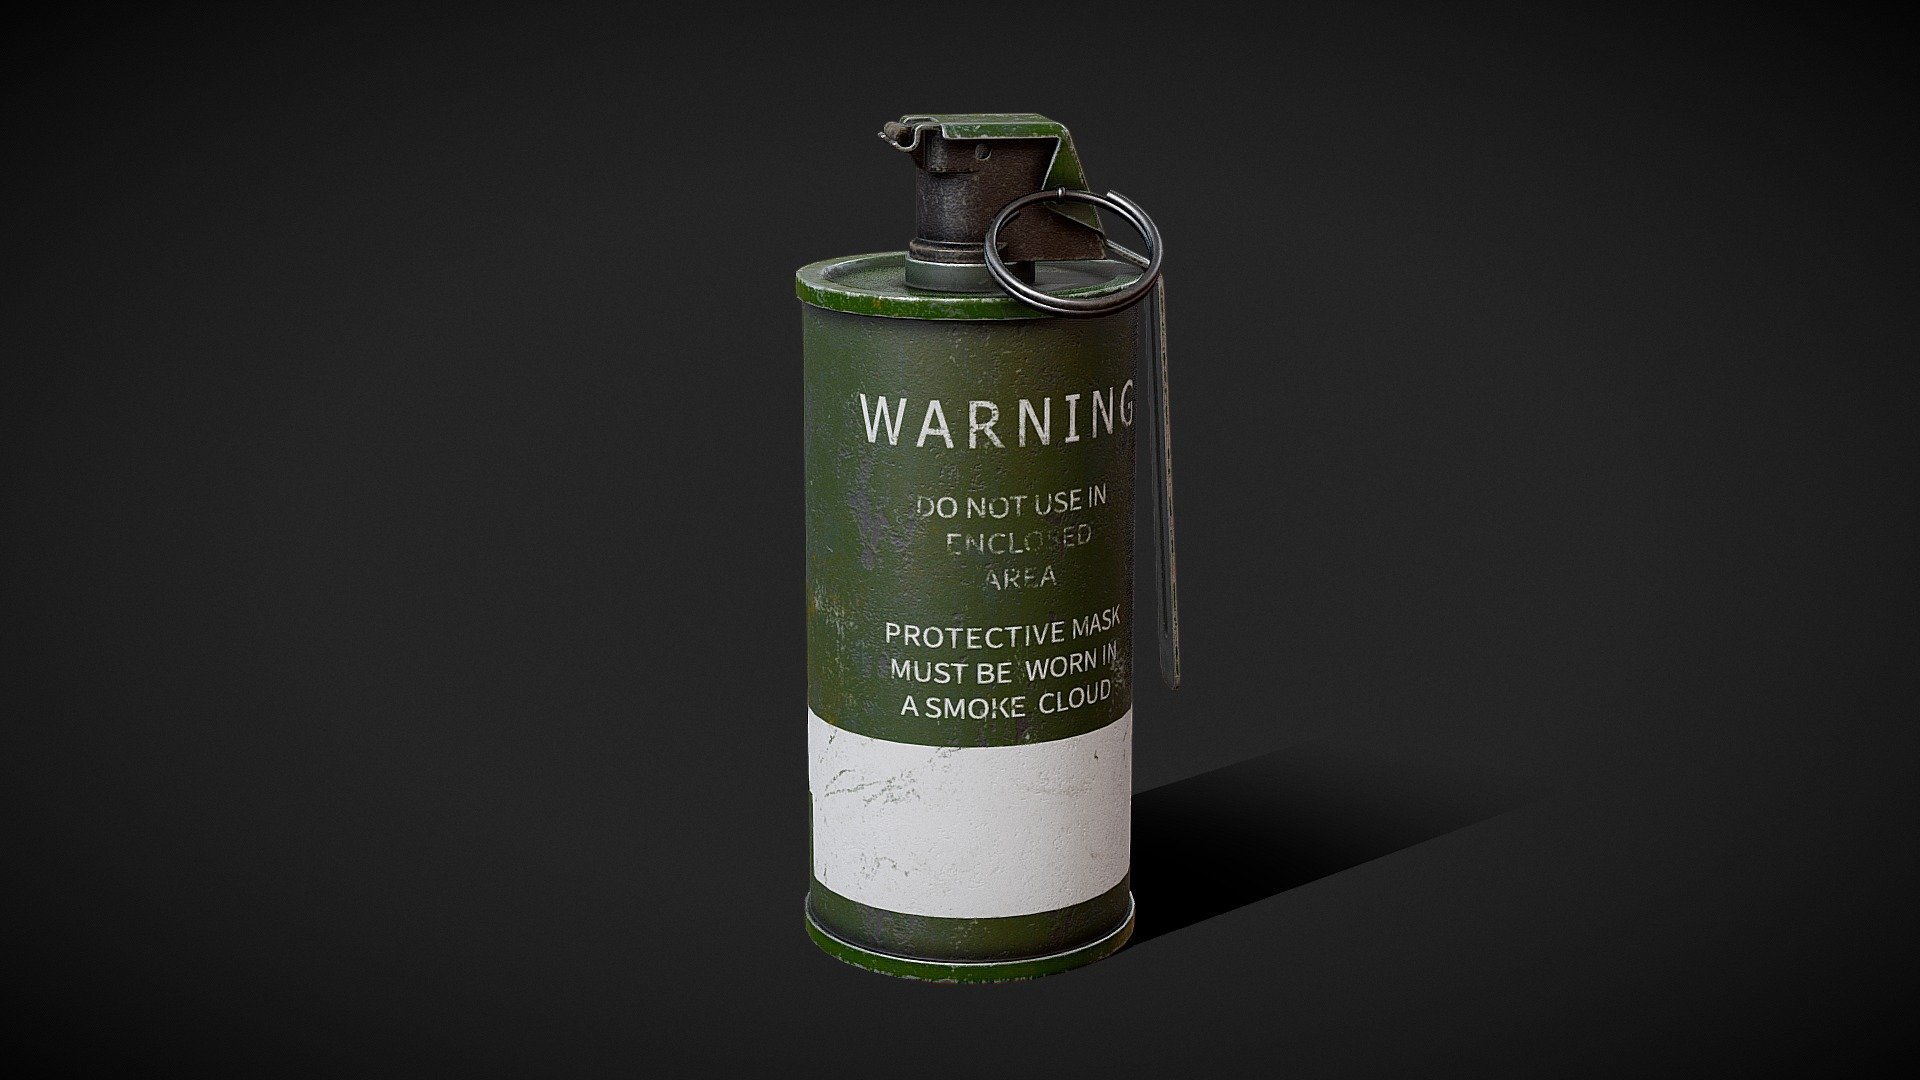 &mdash;General Information&mdash;

Lowpoly, optimized for modern game engines.

Made using real world scales

High quality 4k textures

Created to be used in a modern engine that supports physically based rendering (PBR) comes with textures optimized for Unreal Engine 4 and Unity 5.

-Detailed Model Specifications-

Weapon and Magazine contains 5 separate objects and are ready to be rigged. the objects are:

Body
Fuze
Safety Lever
Pin
Ring
&mdash;Texture Information&mdash;

All 4k Texture

Unreal :

Base color
Nomal
Roughness Metallic AO
Unity:

Albedo
AO
MetallicSmoothness
Normal
(All textures are in .tga format) - Smoke Grenade M18 - Buy Royalty Free 3D model by GameWeapons 3d model